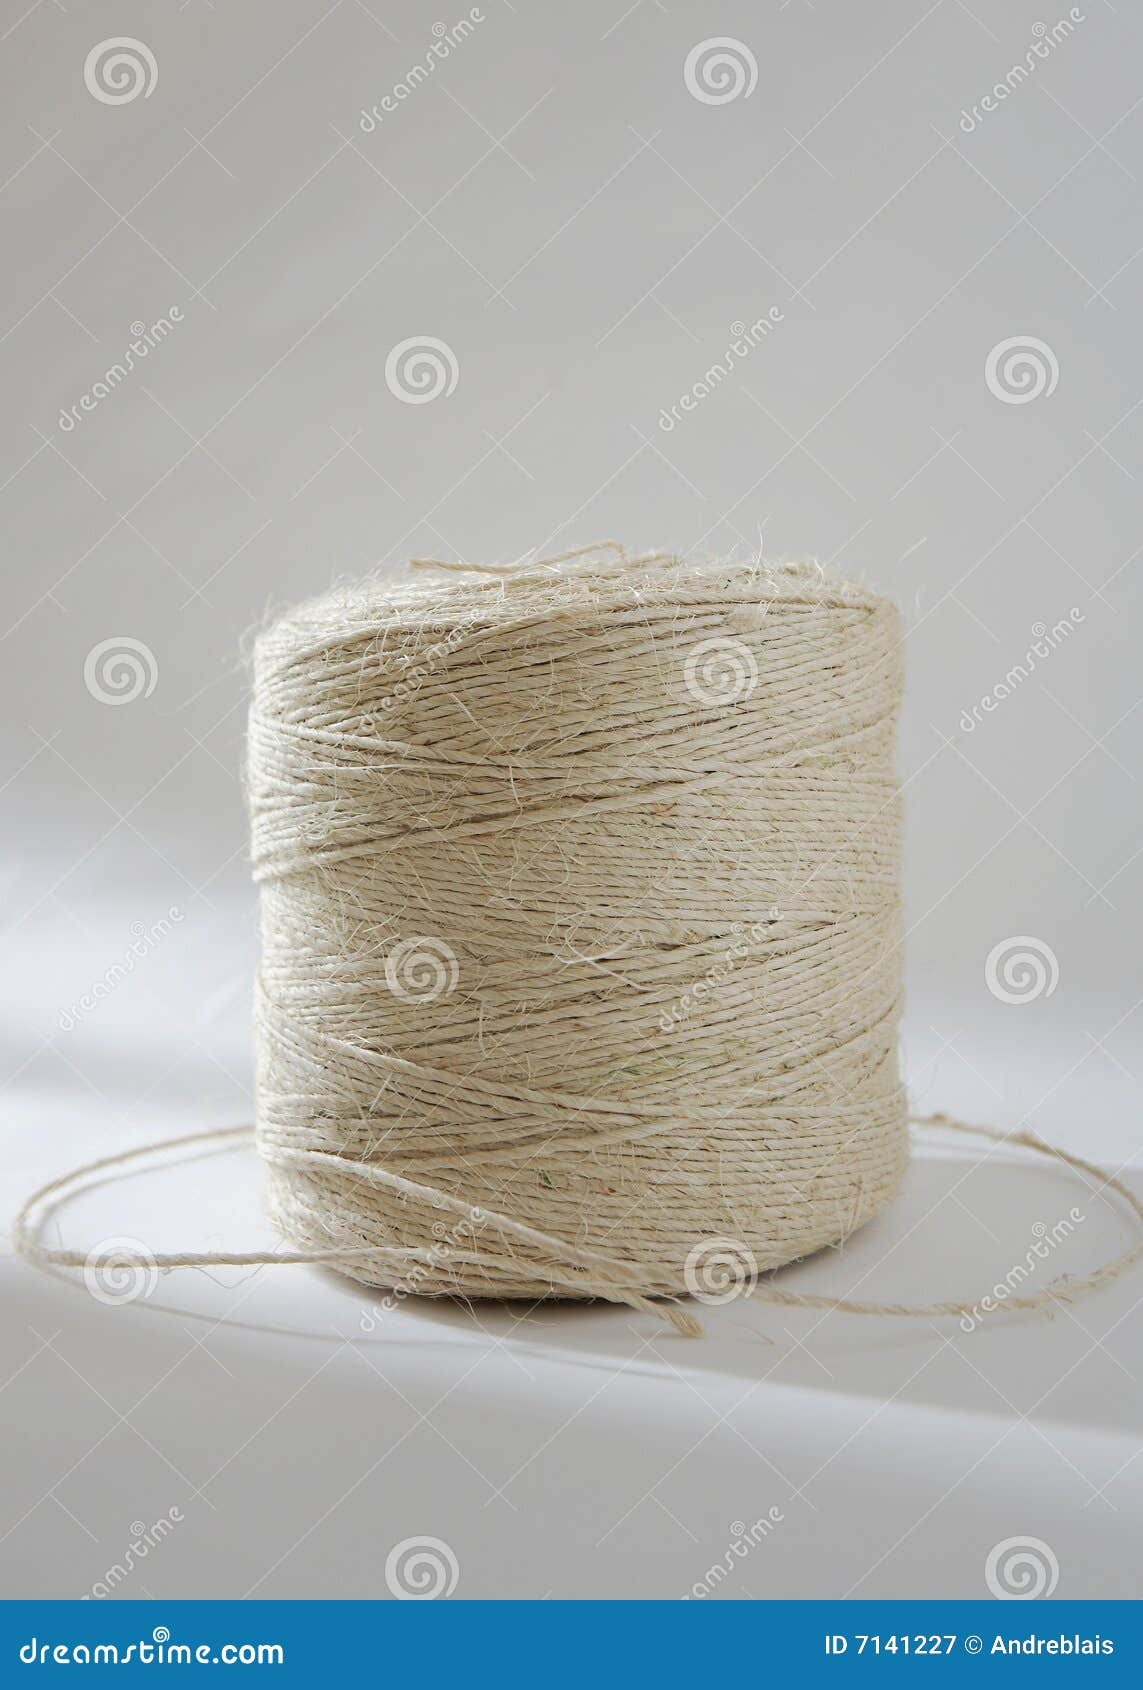 Ball Or Reel Of Coarse Brown Twine Stock Photo, Picture and Royalty Free  Image. Image 91297142.